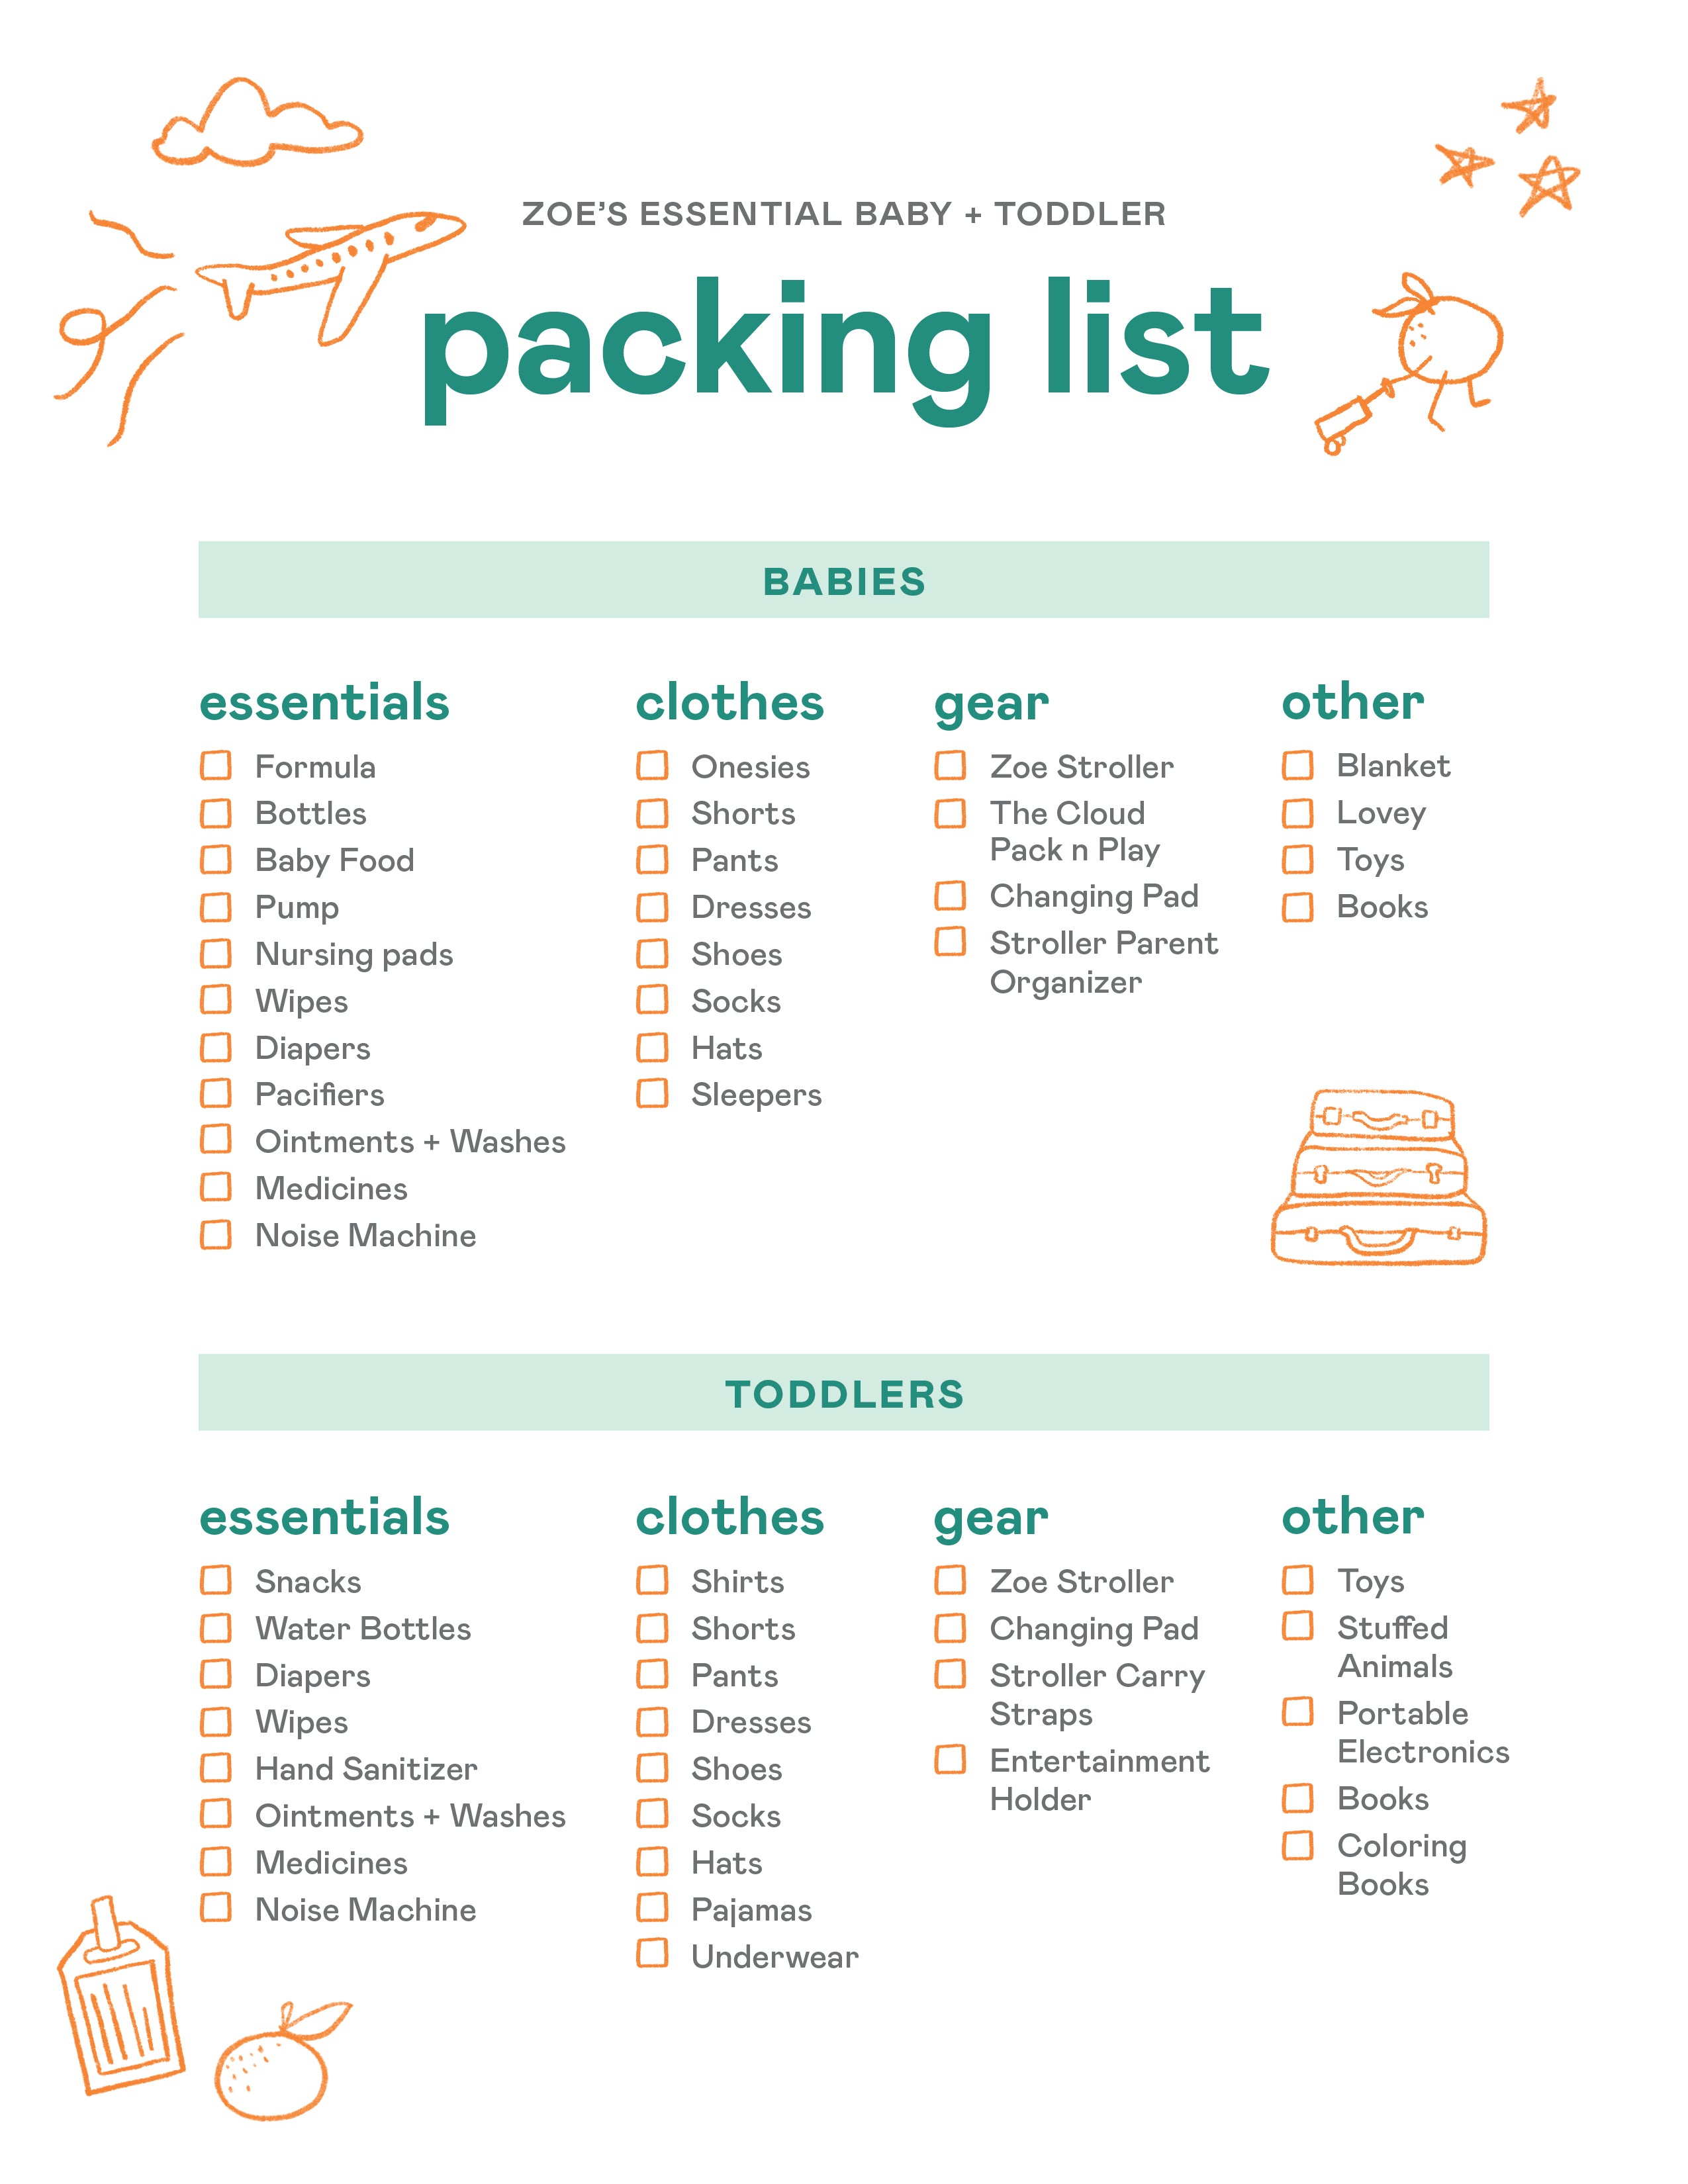 Packing Checklist for Traveling With Toddlers